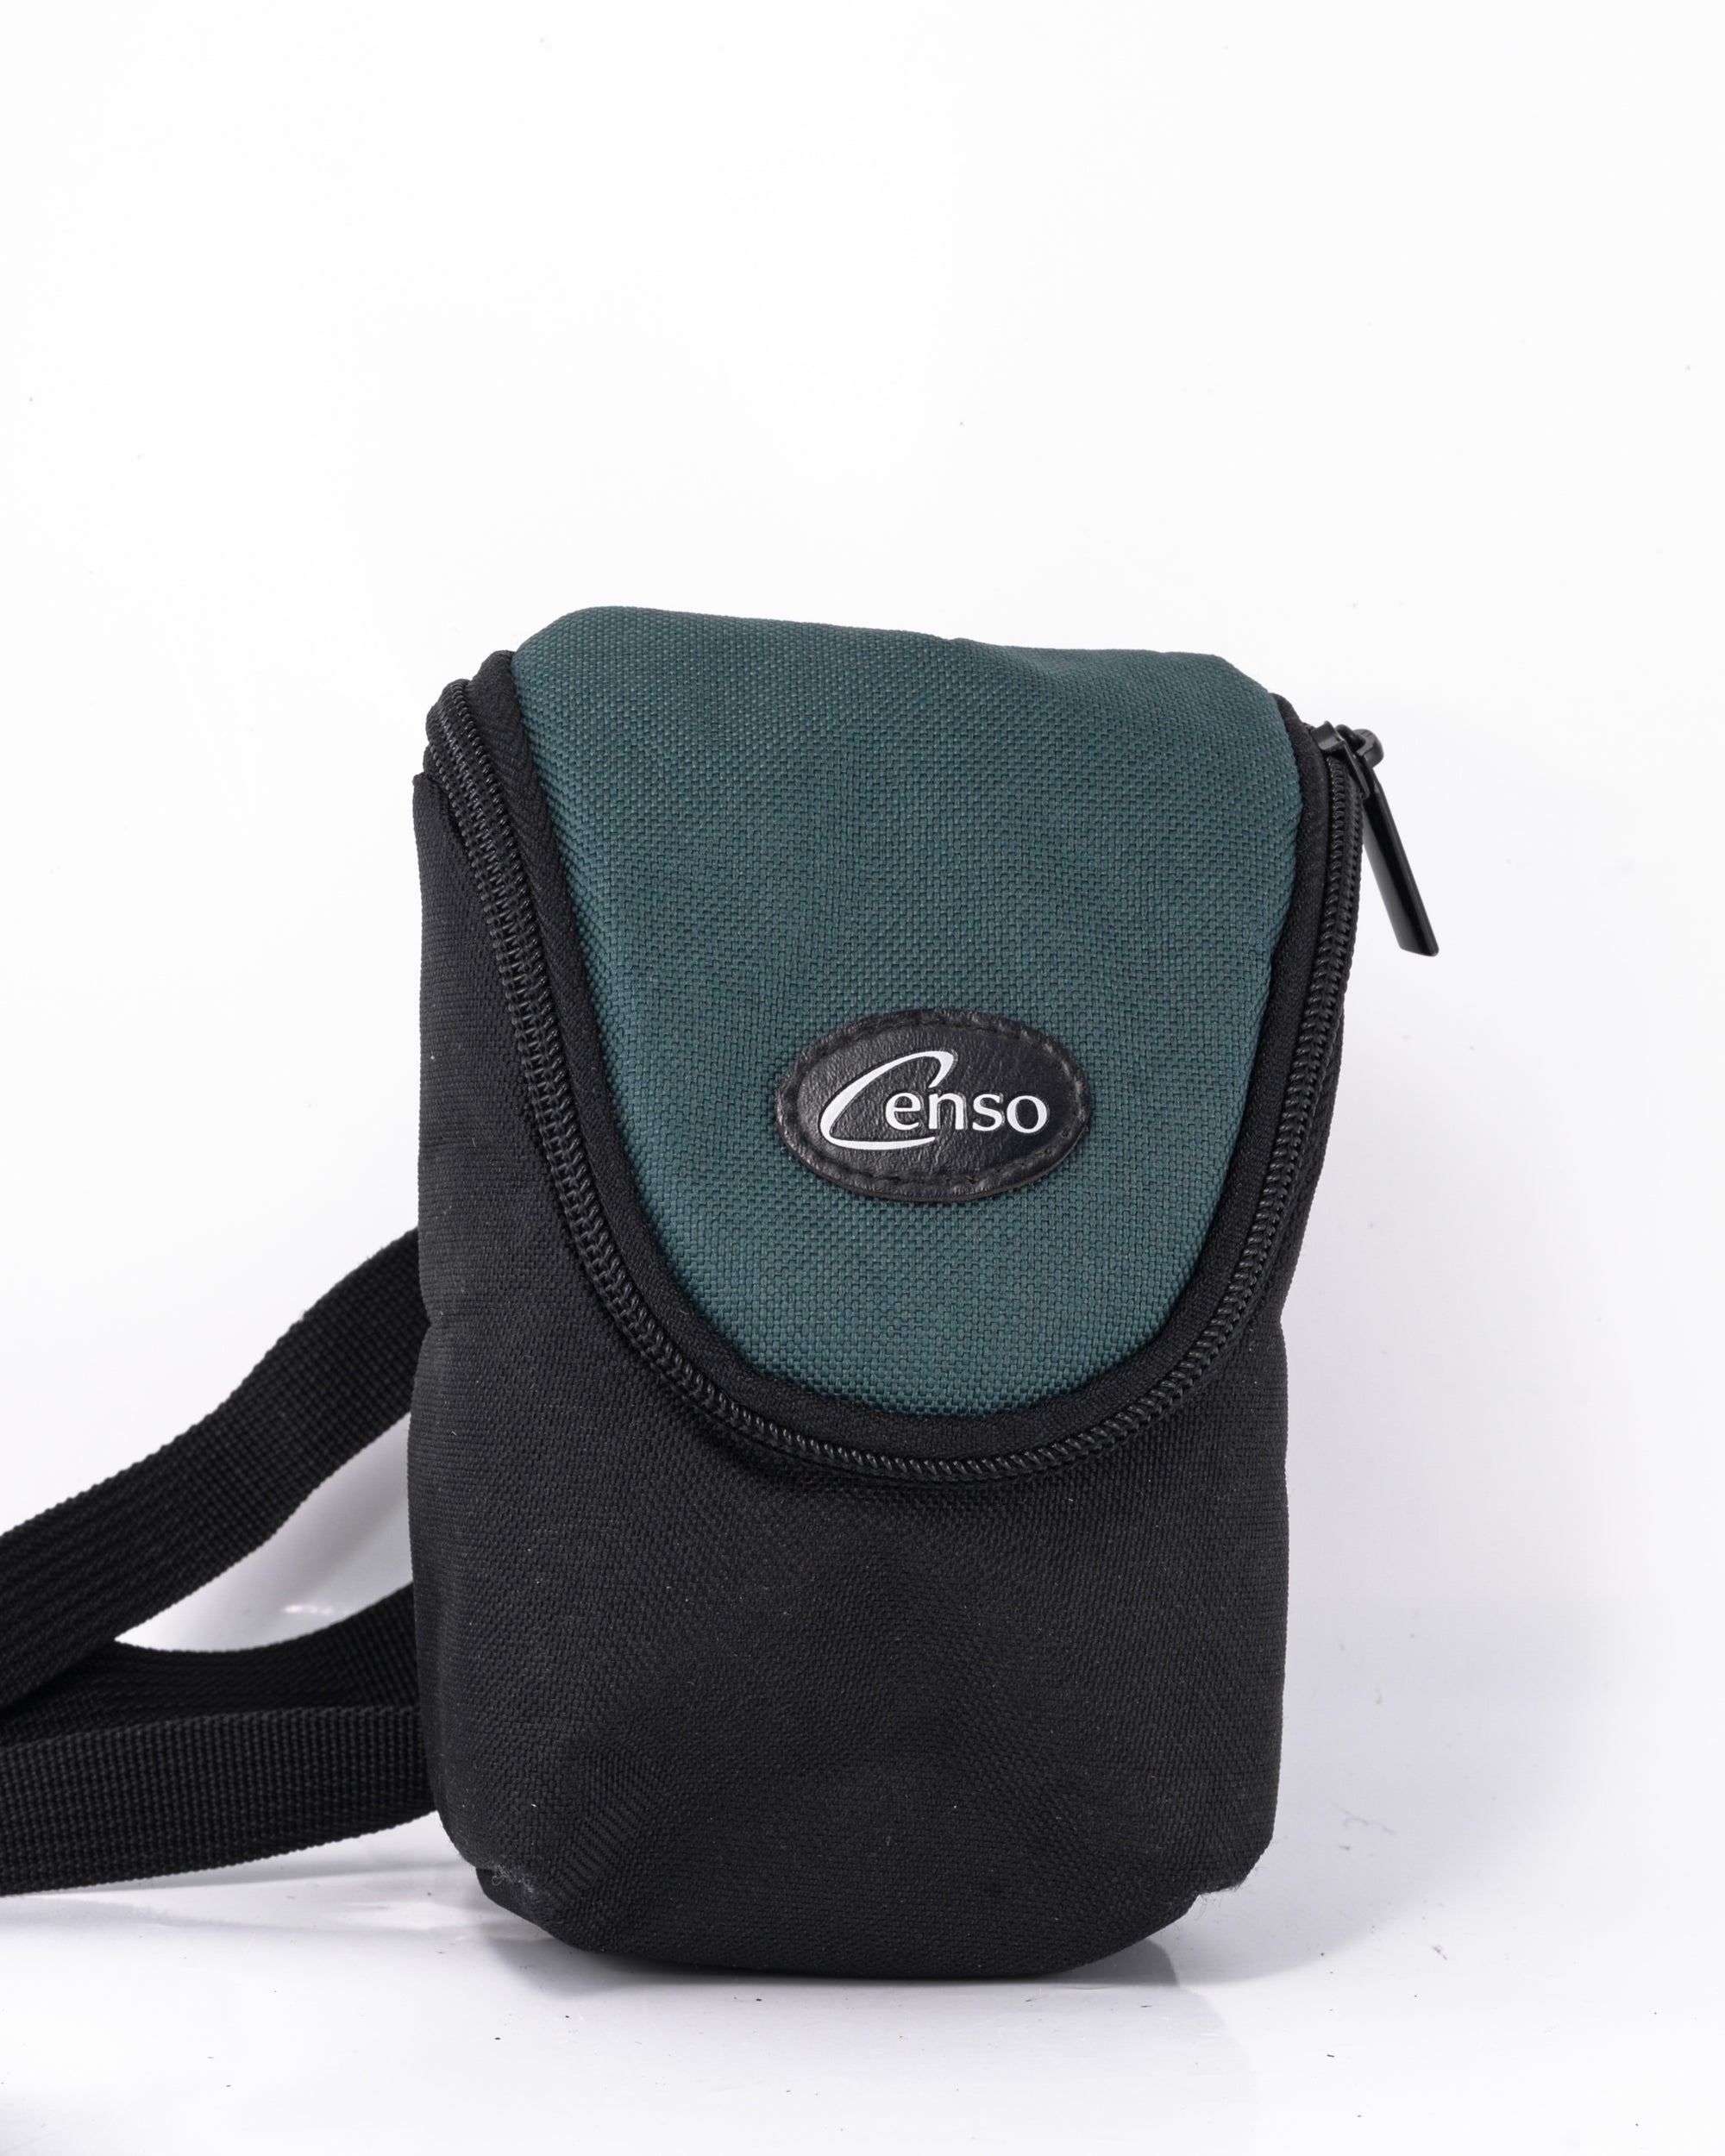 Vintage CENSO Point & Shoot Pouch